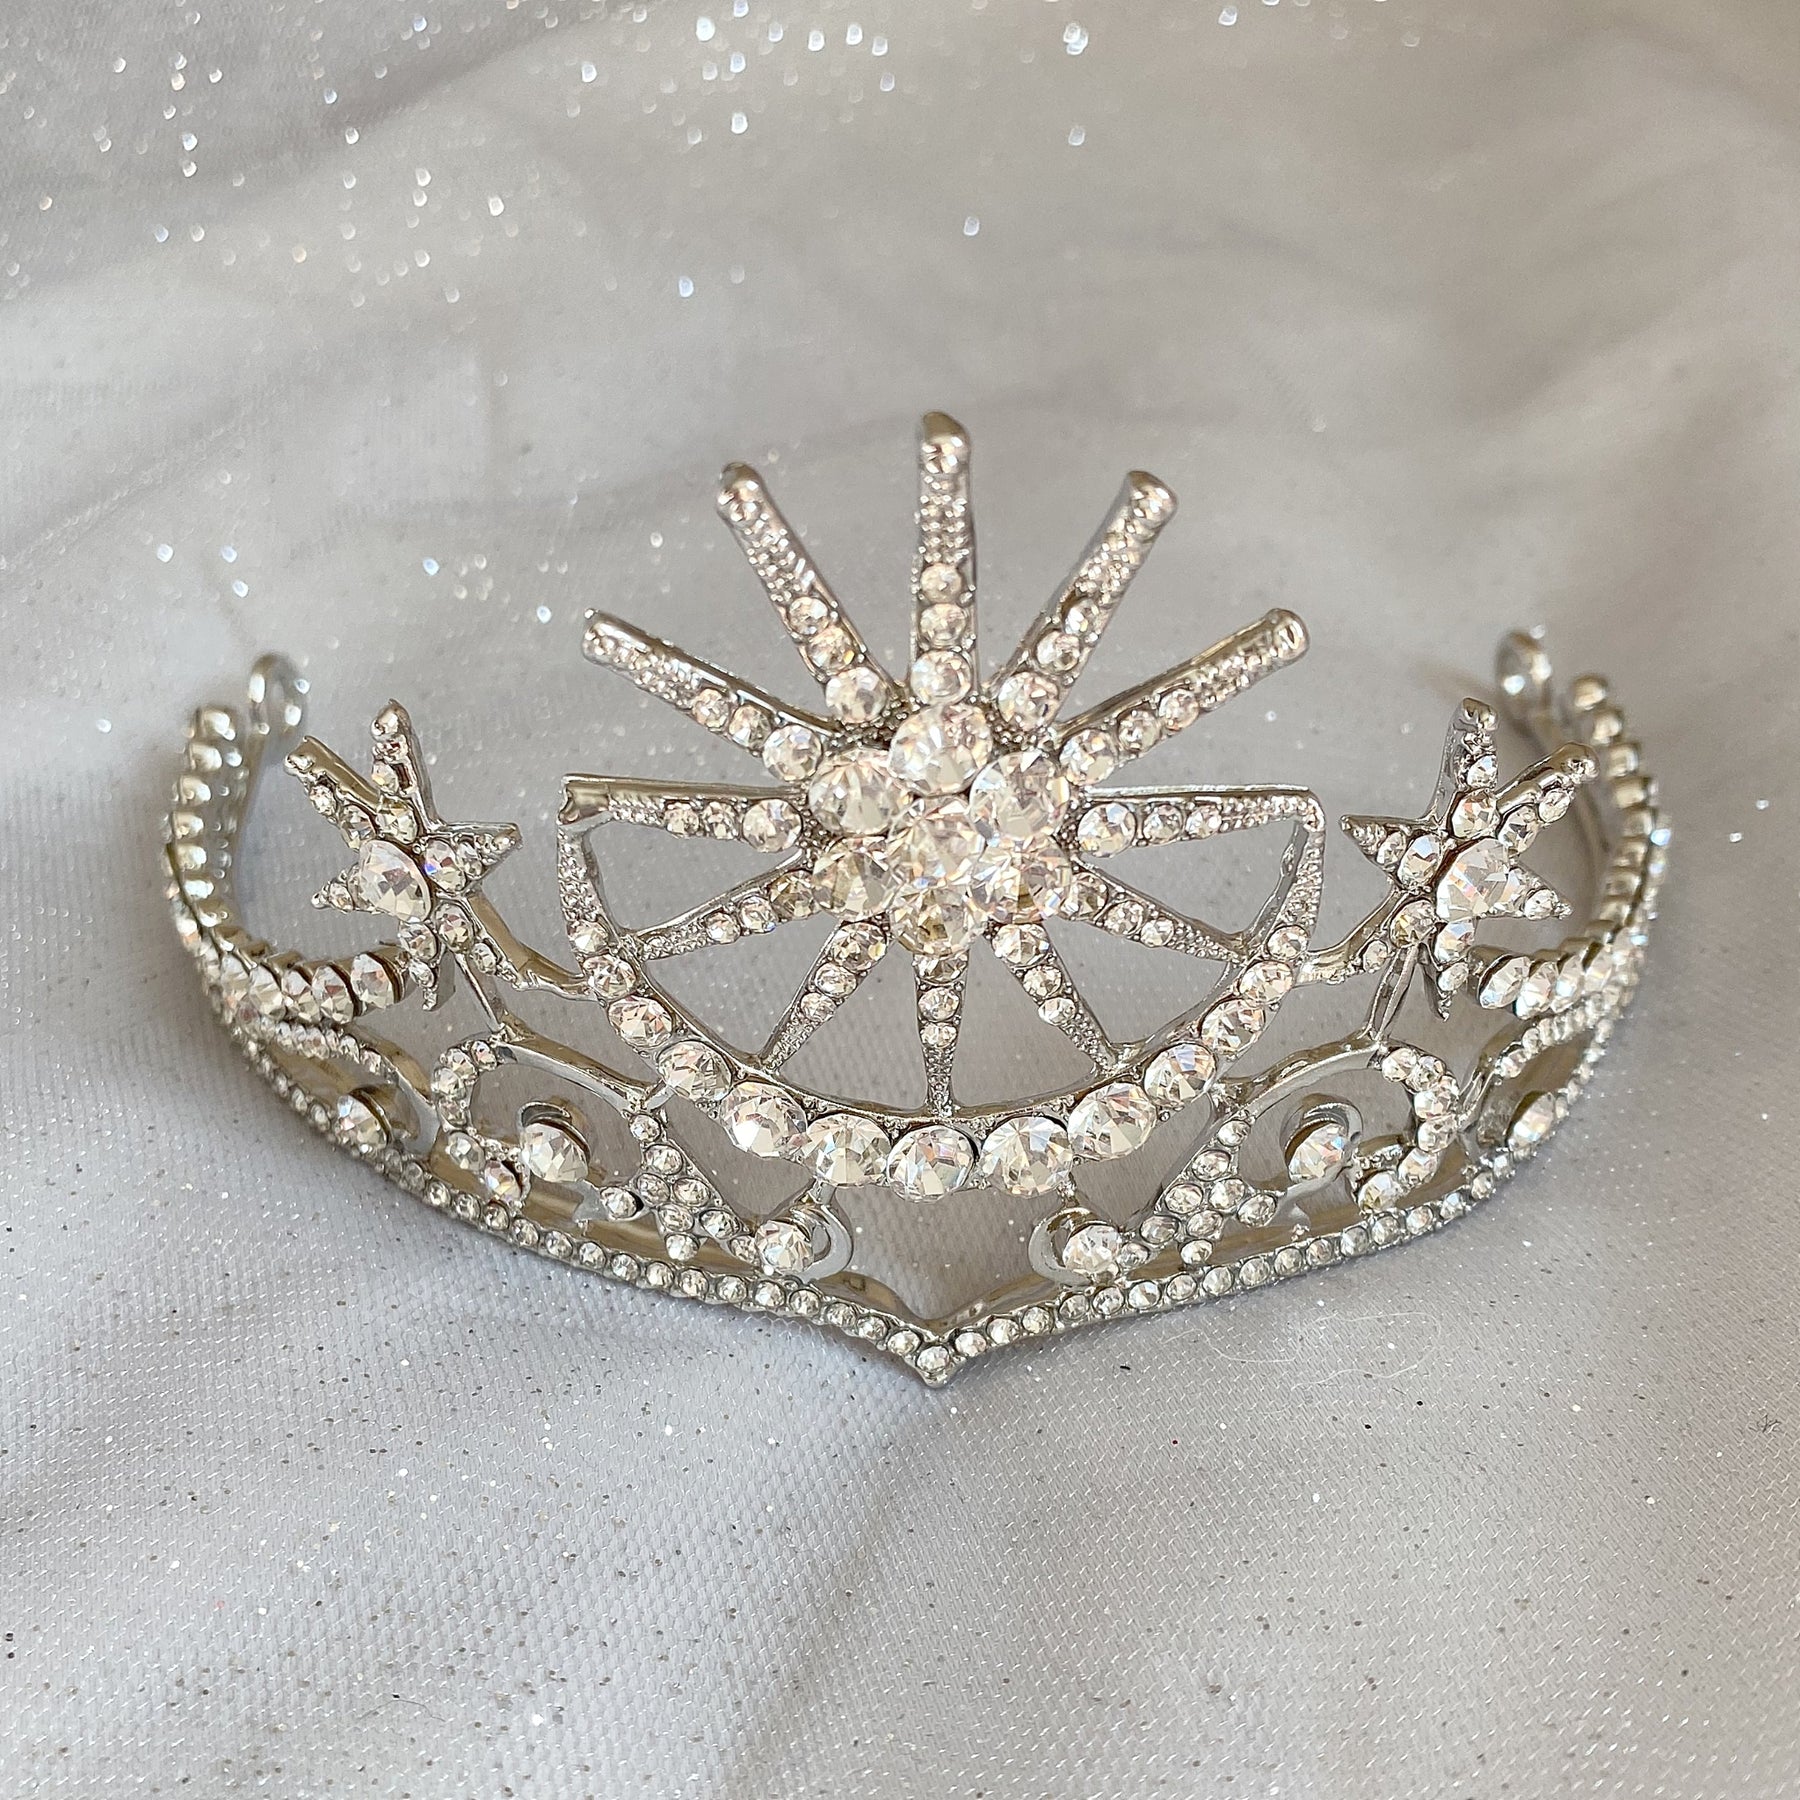 Tiara with Moon and Stars – QueenMee Accessories